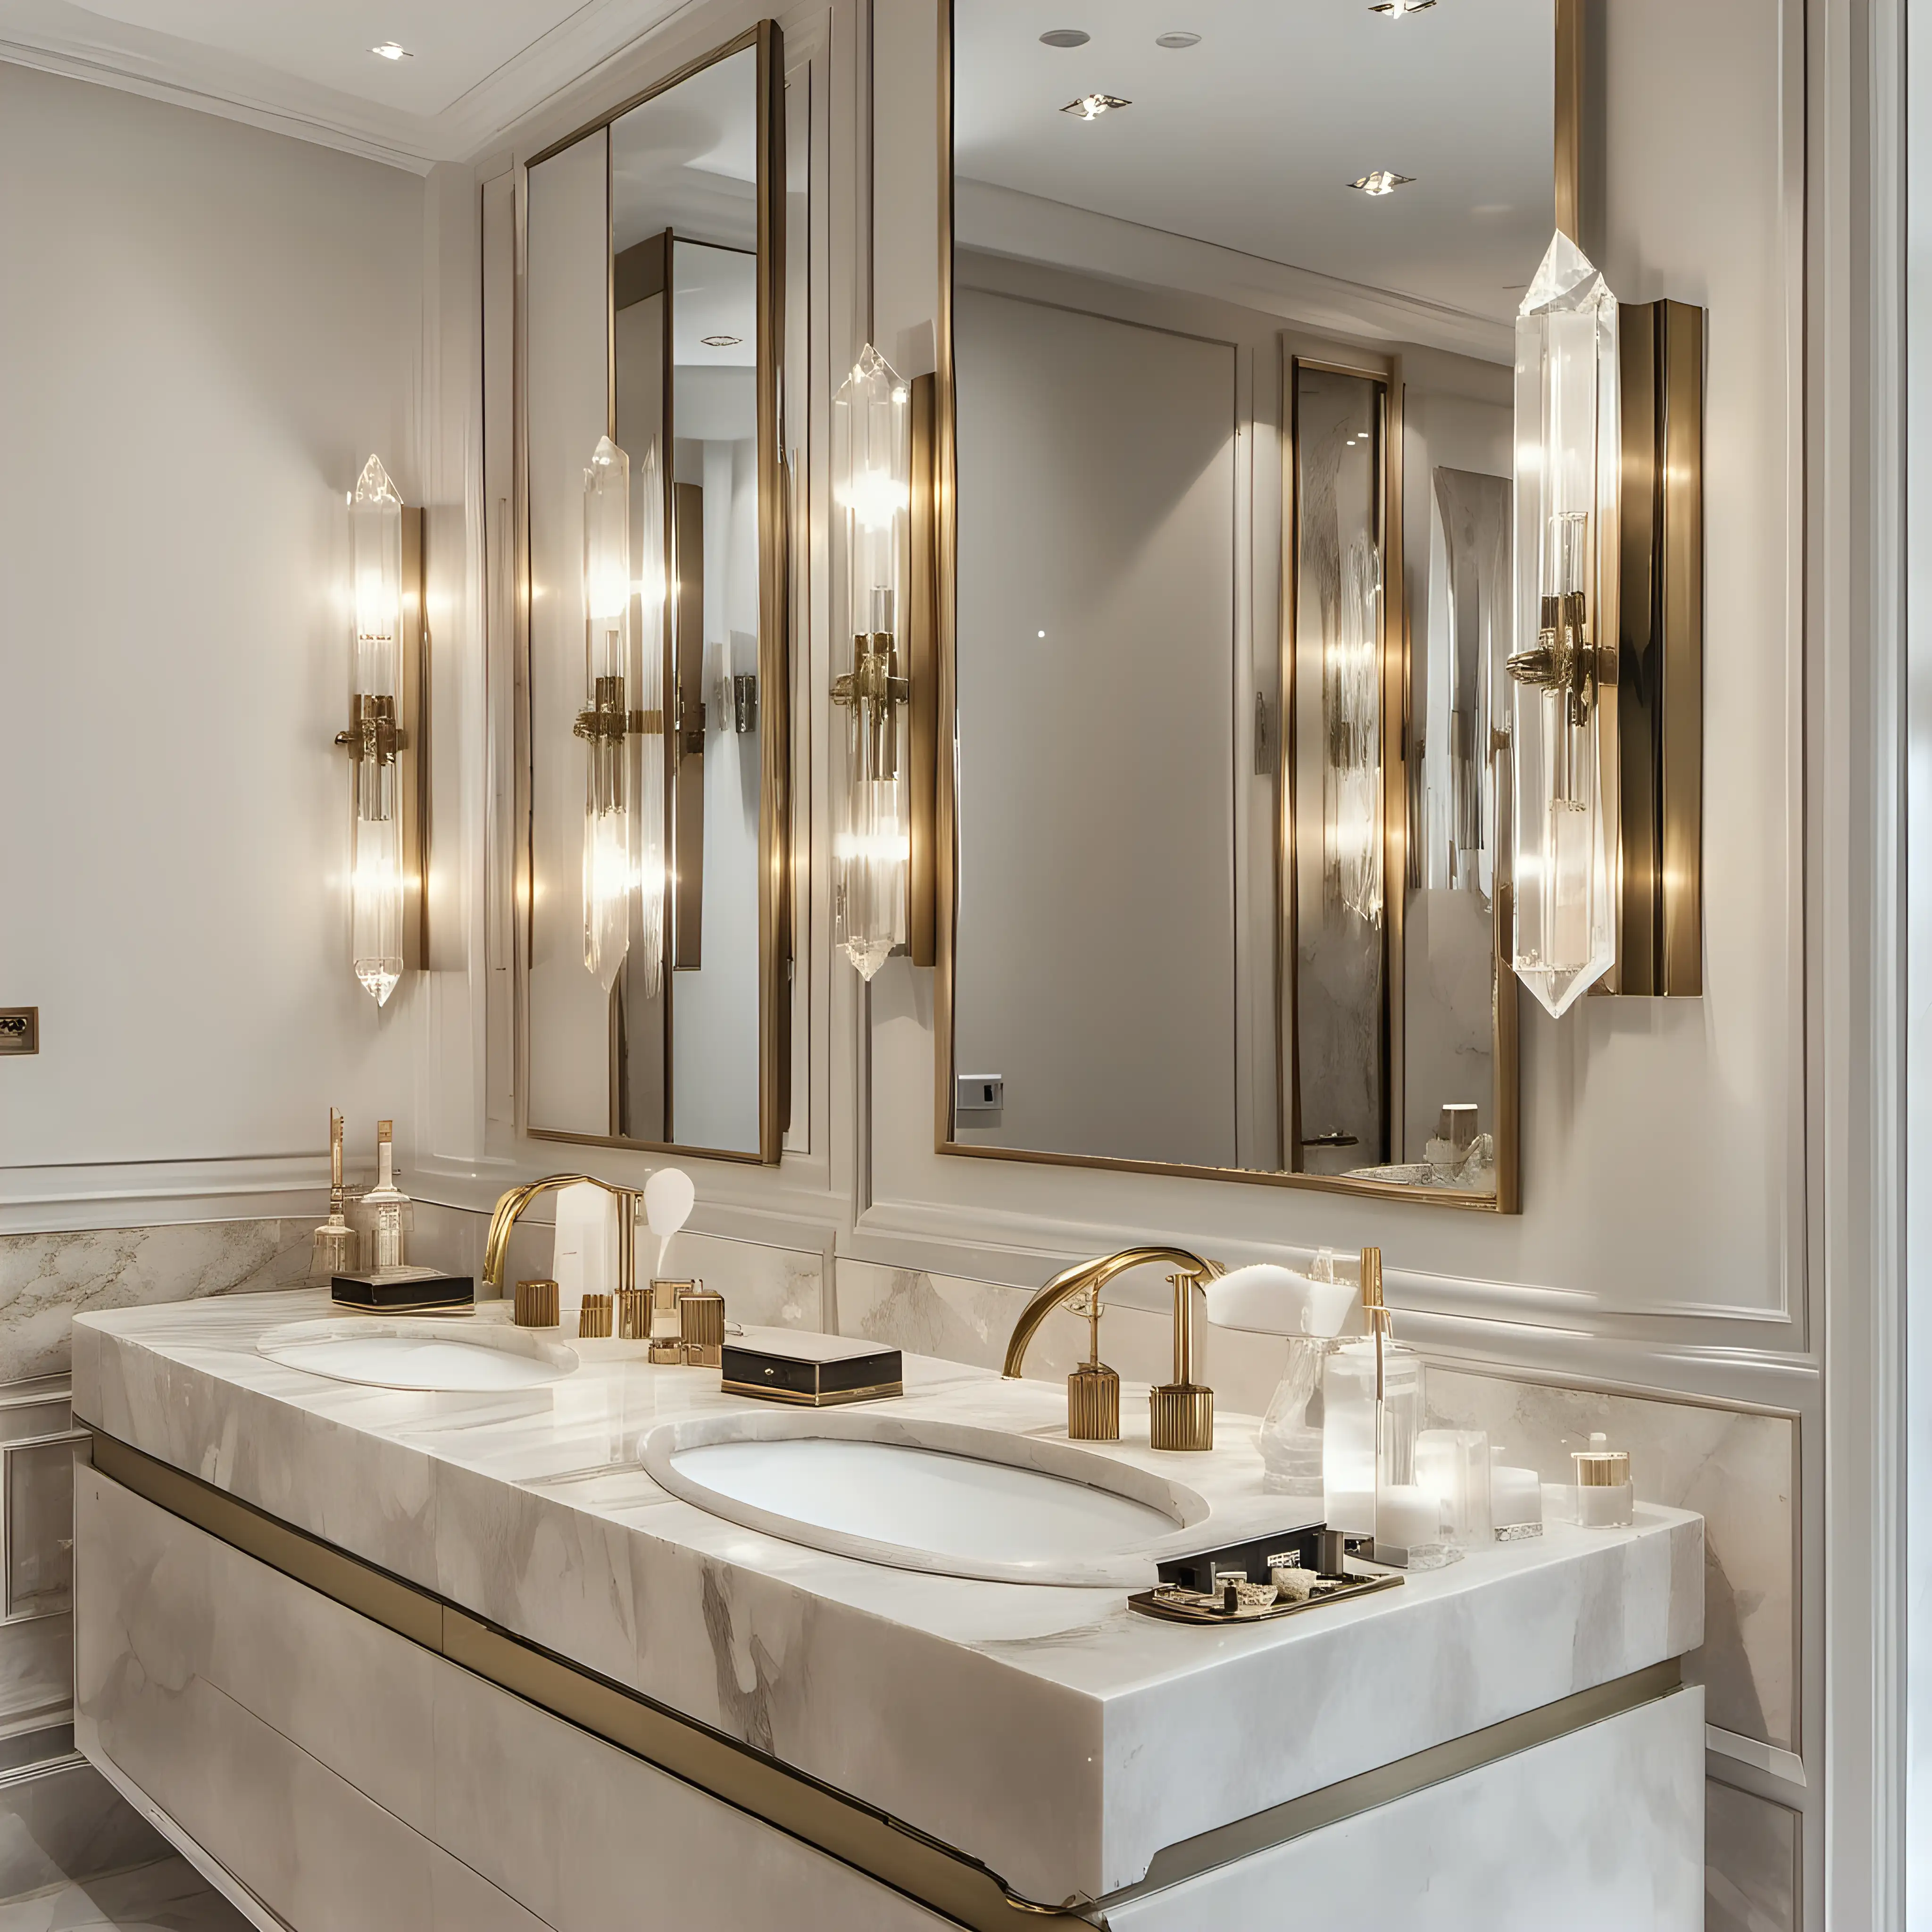 Elegant Beige Marble Luxury Bathroom with Antique Brass Accents and Double Vanity